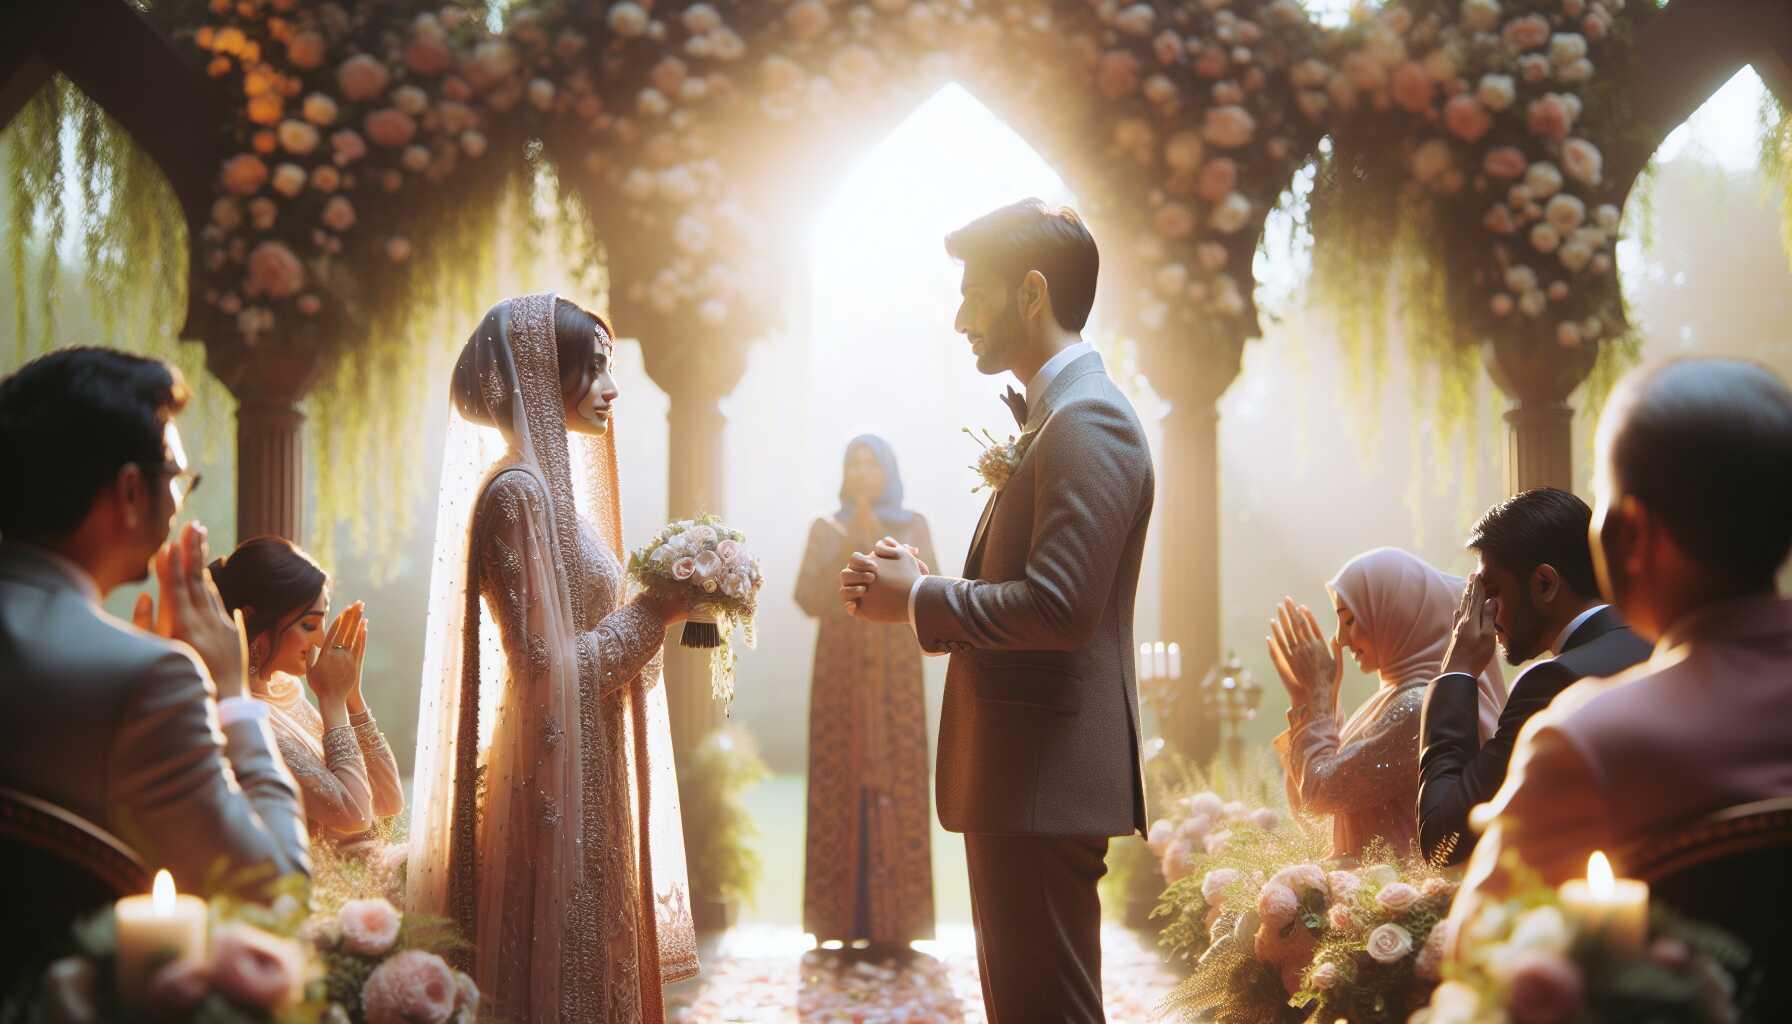 10 Heartfelt Romantic Wedding Vows Examples to Inspire Your Big Day